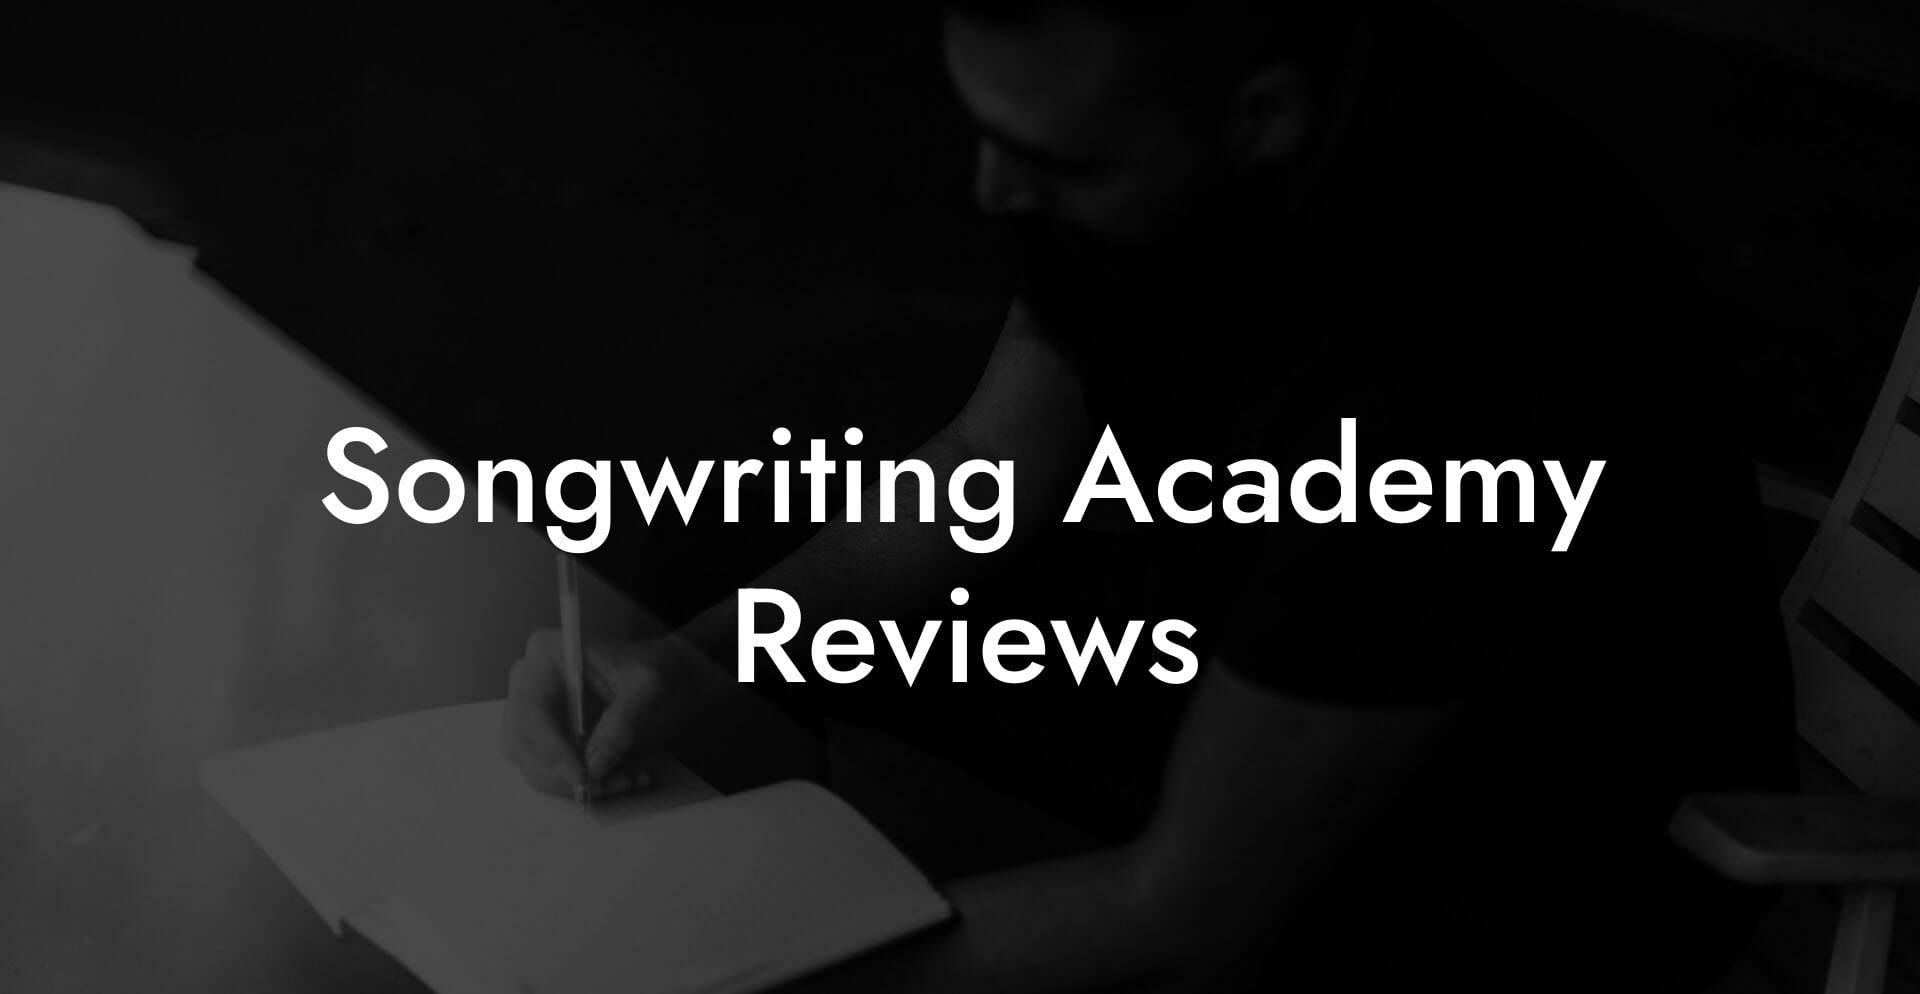 songwriting academy reviews lyric assistant